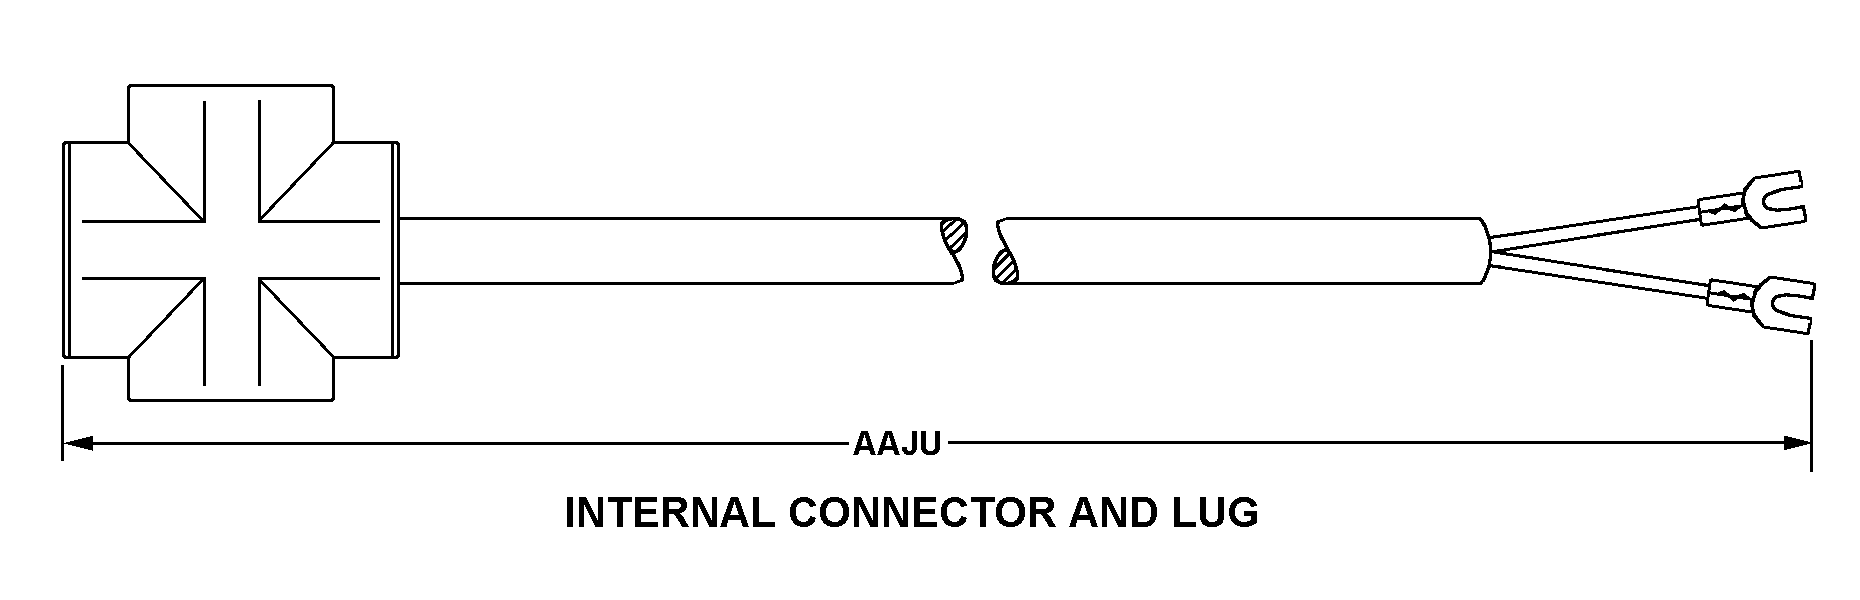 INTERNAL CONNECTOR AND LUG style nsn 6150-00-995-3848